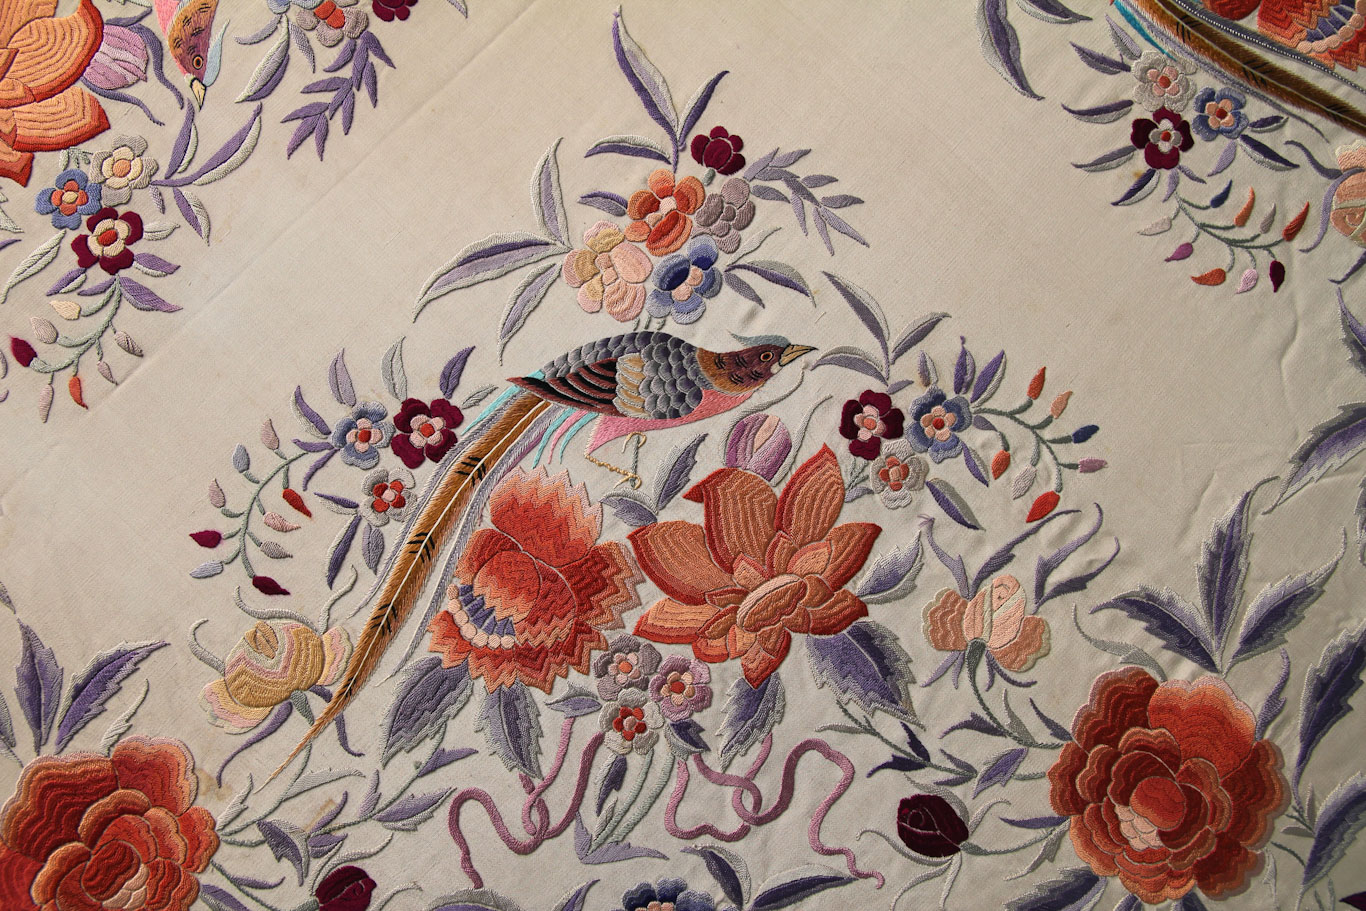 Guang Embroidery - A 1,000-year-old National Treasure Flourishes on Fingertips